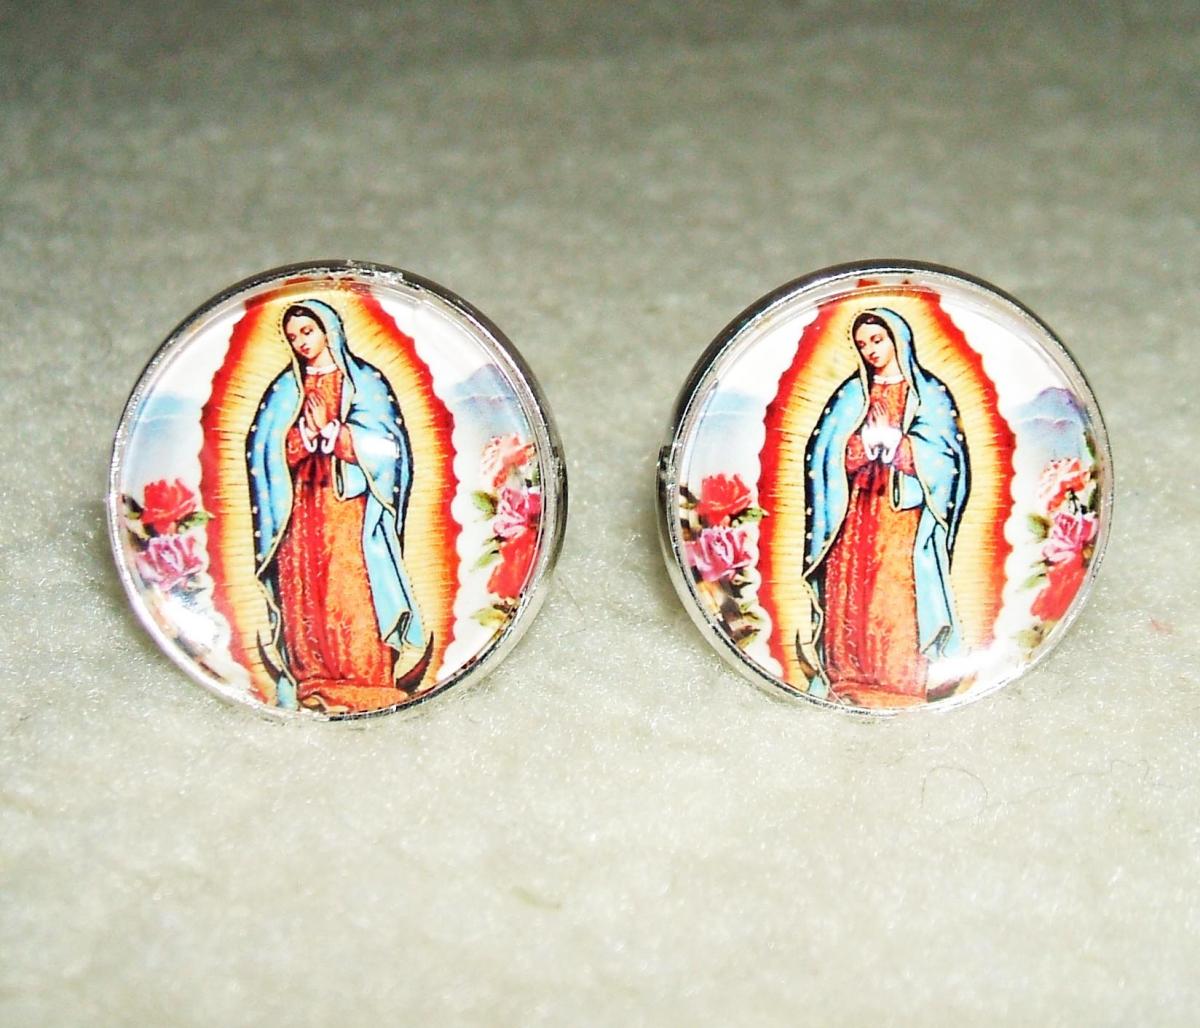 Virgin Of Guadalupe Cuff Links Men Women Cufflinks Jewelry Altered Art Vintage Religious Icon